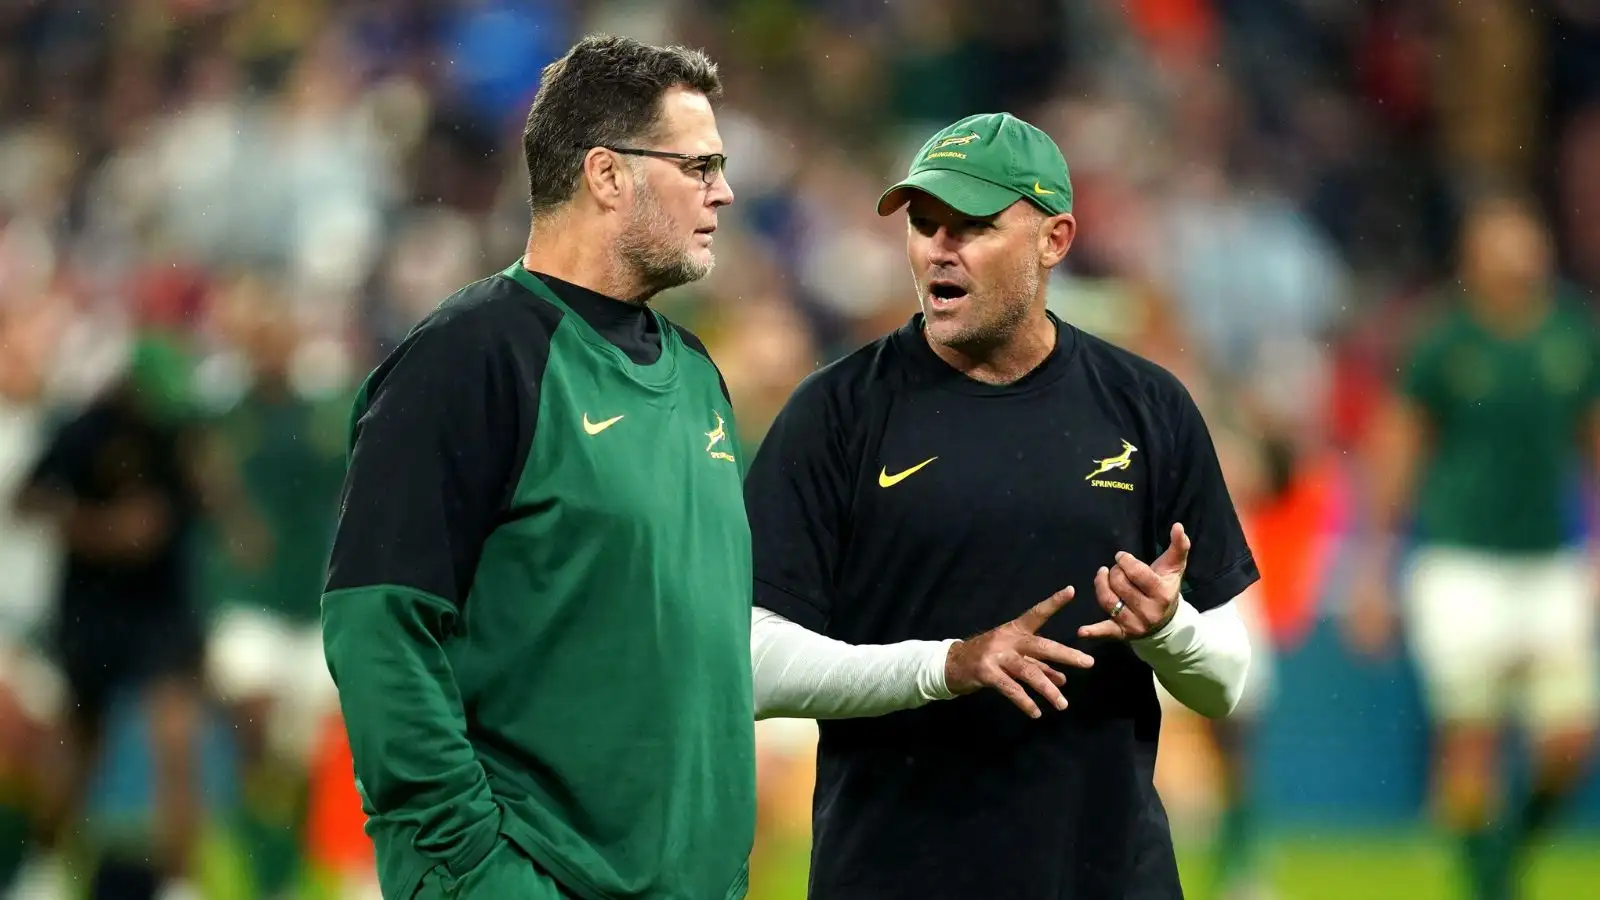 Springboks director of rugby Rassie Erasmus and head coach Jacques Nienaber during the Rugby World Cup.